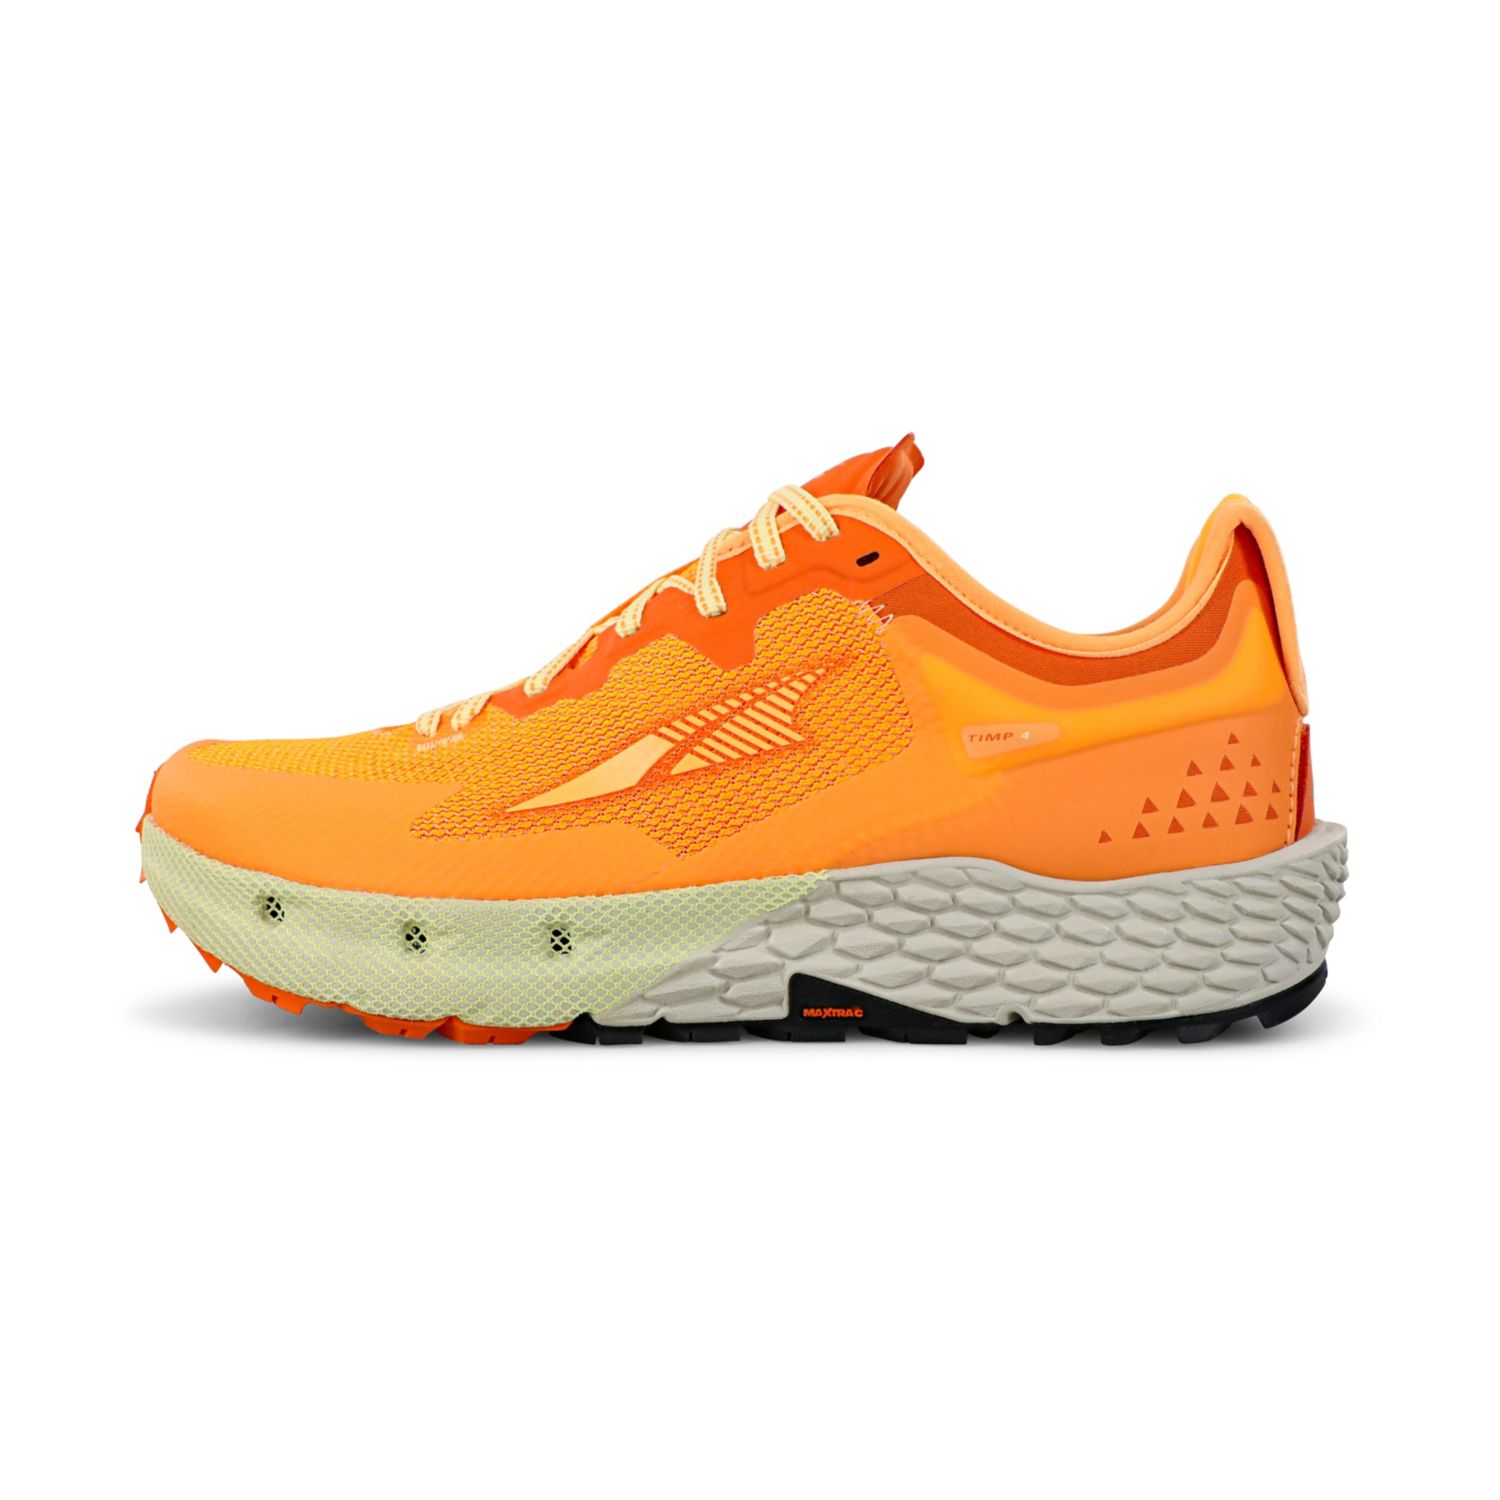 Altra Timp 4 Women's Trail Running Shoes Orange | South Africa-90152479